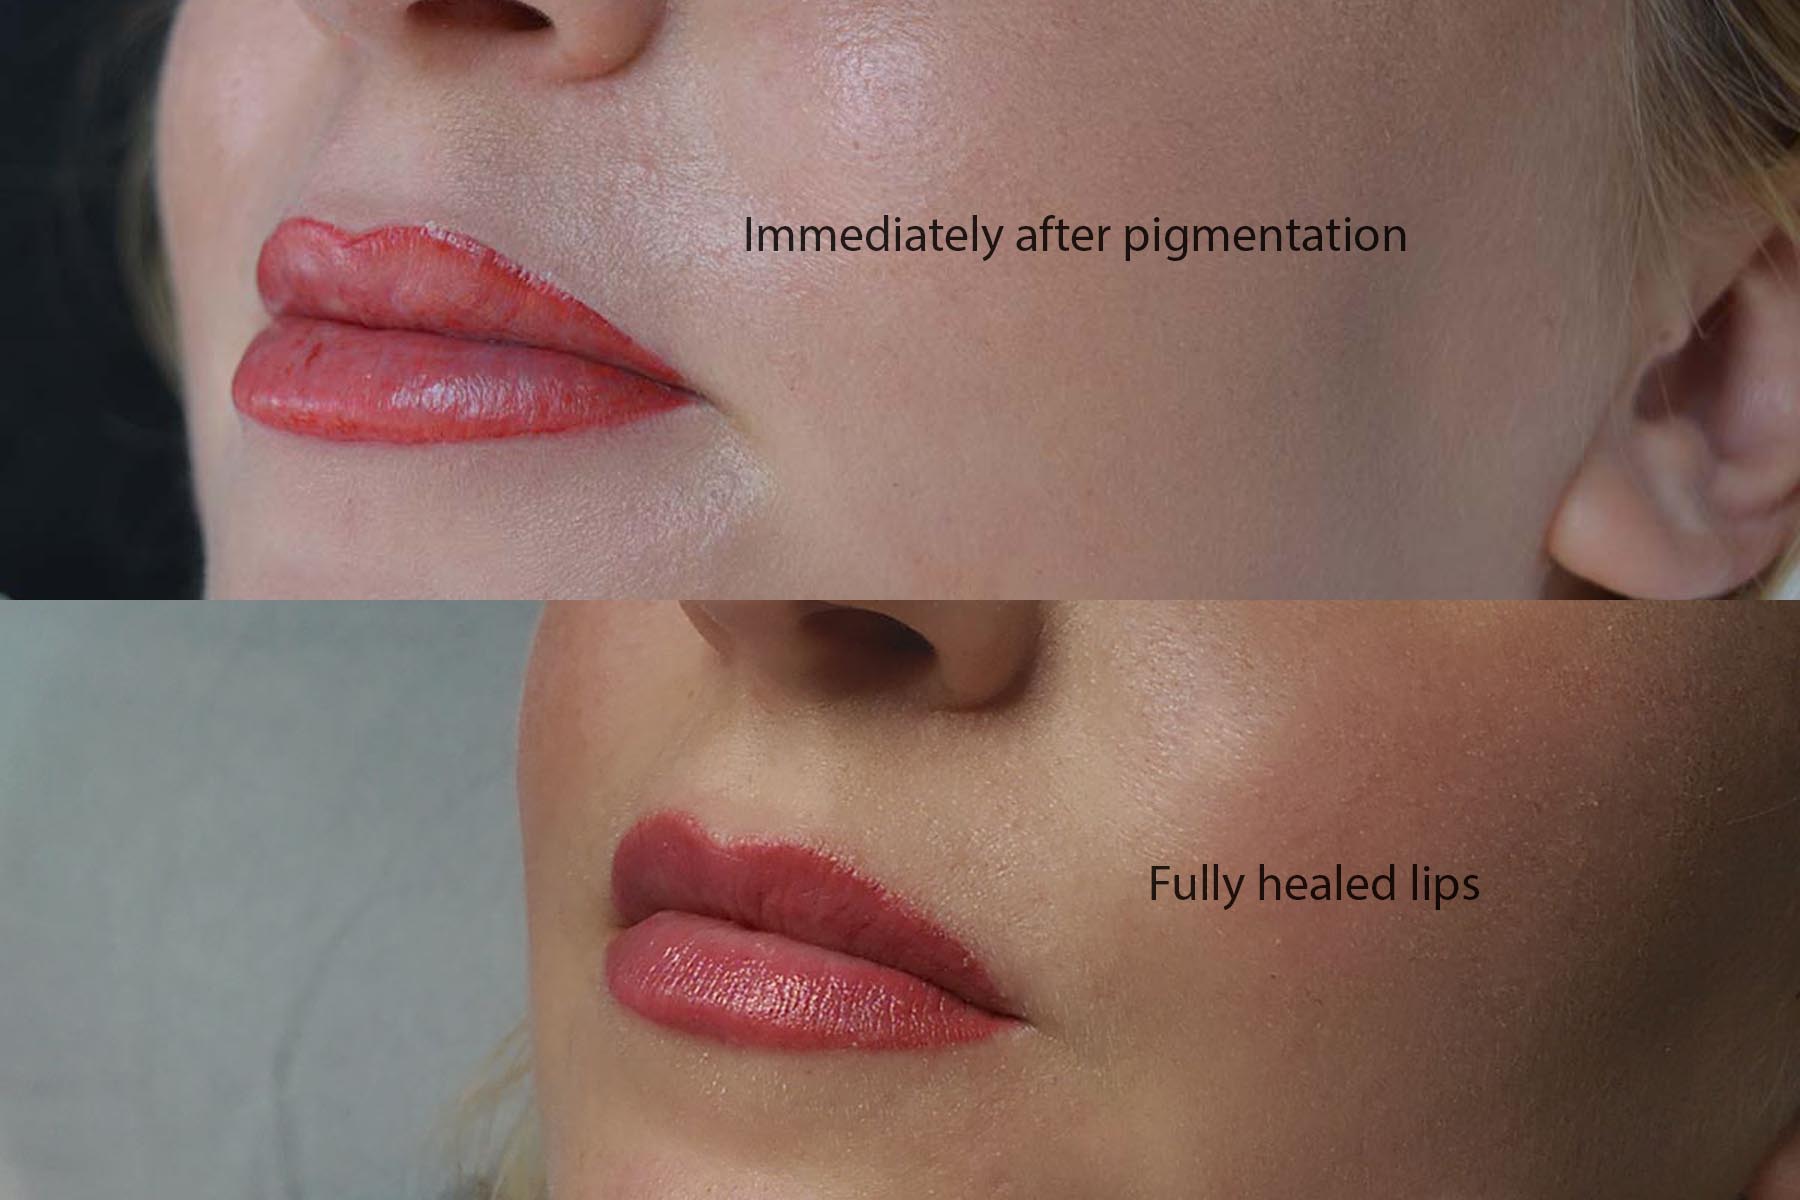 Permanent makeup by Puella Beauty - lips